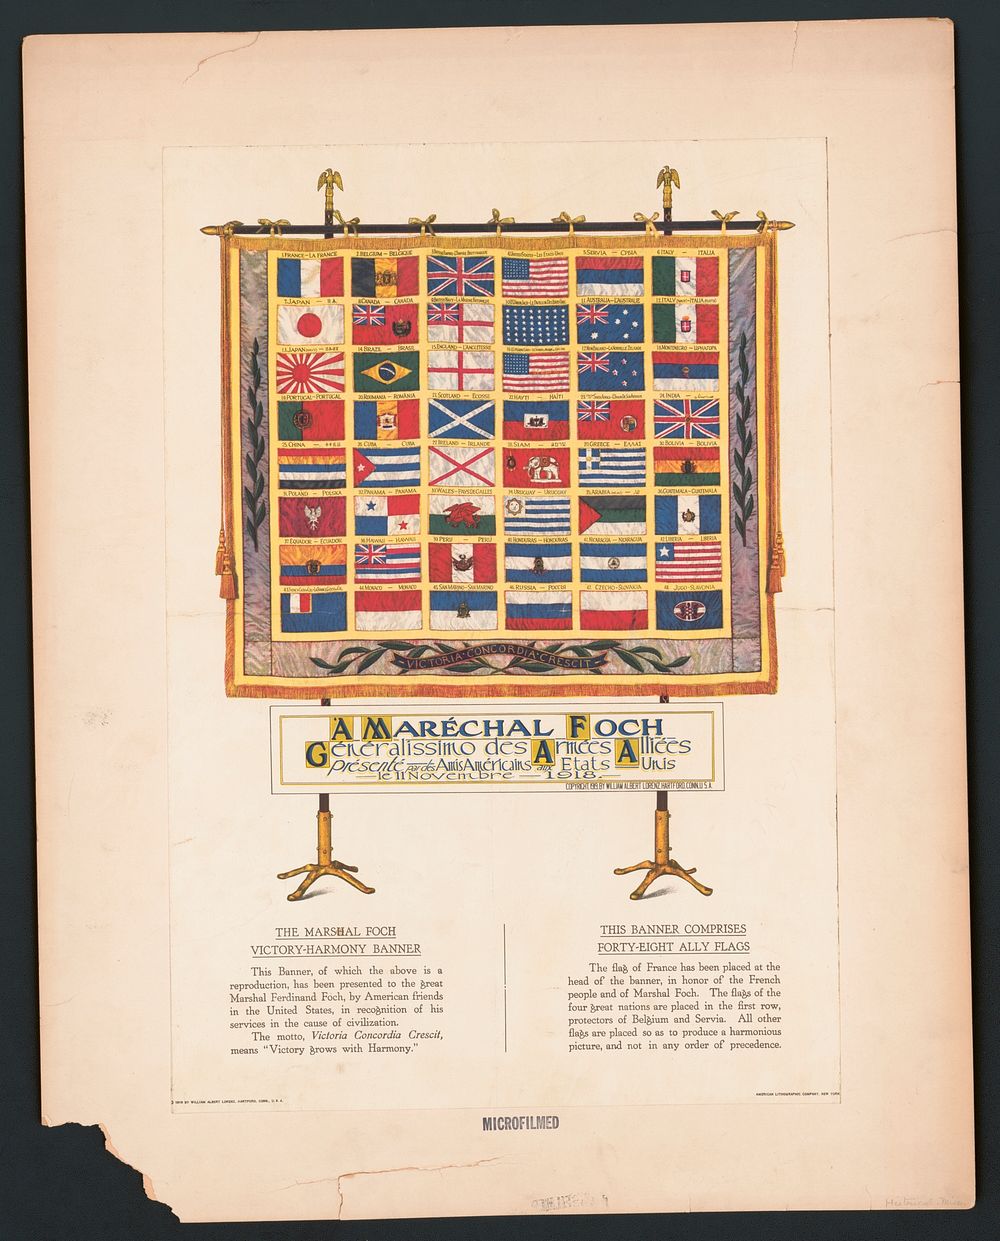 The Marshal Foch victory-harmony banner